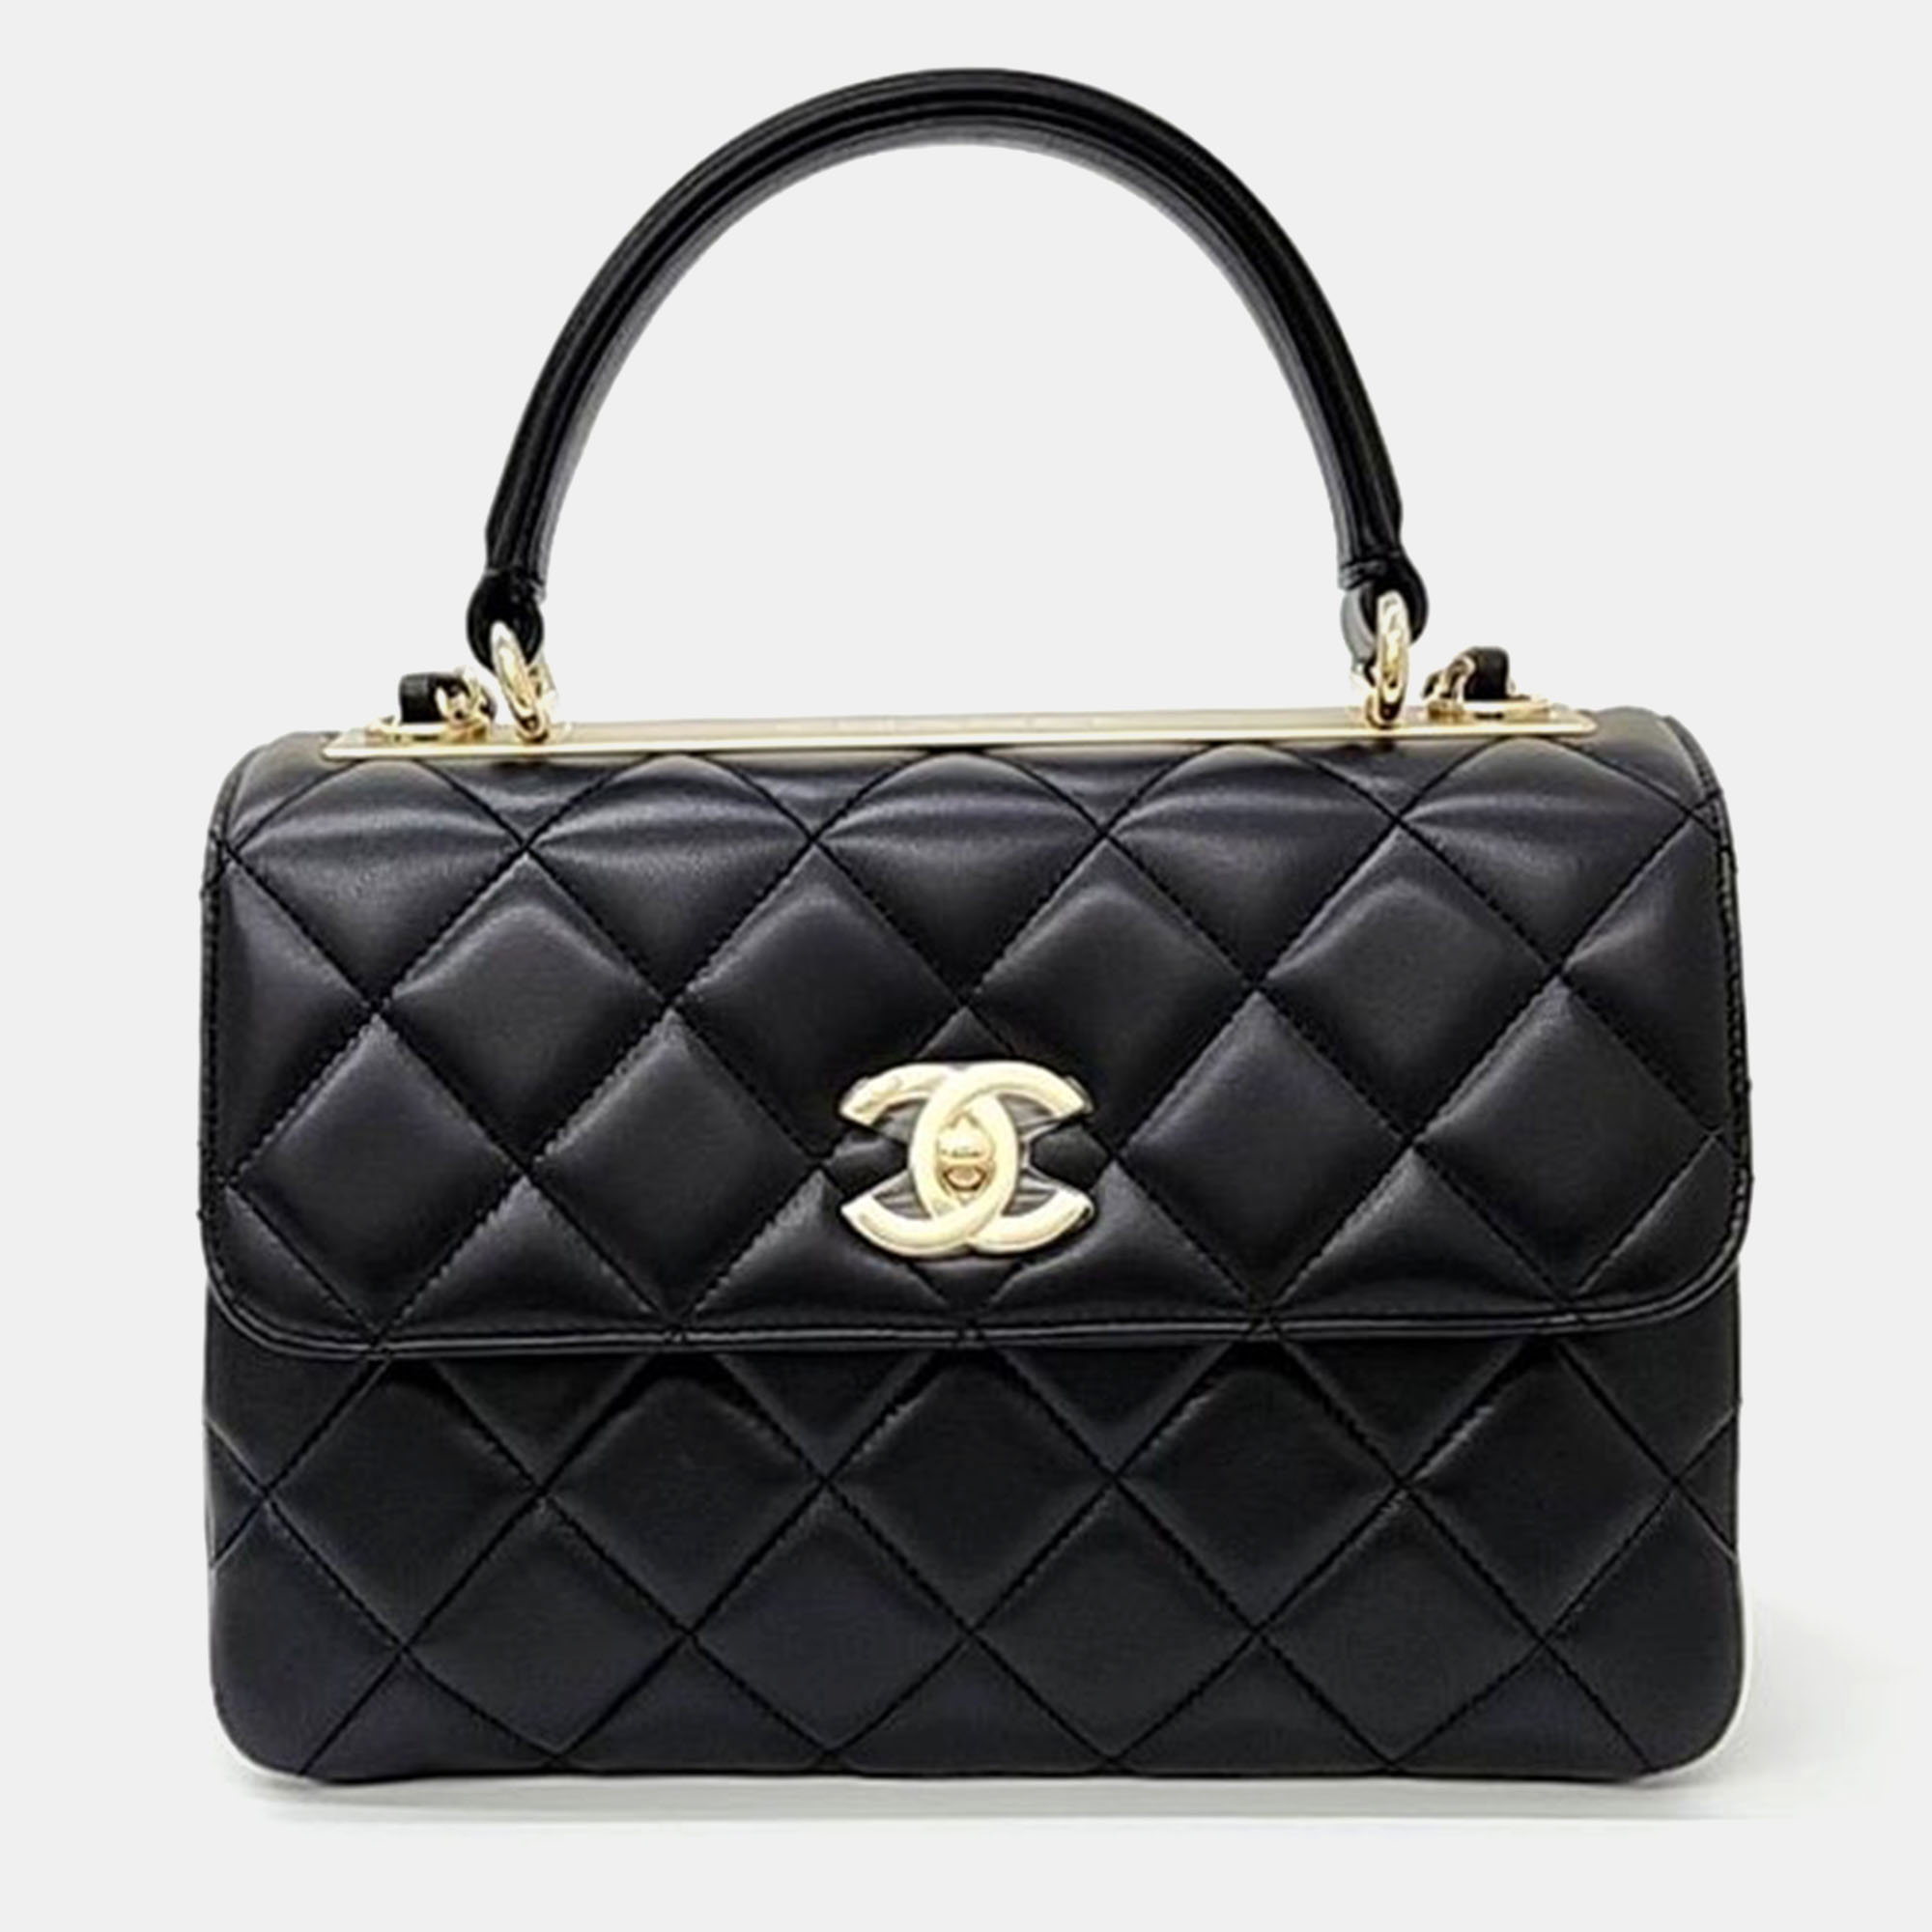 Chanel Leather Black Trendy CC Small